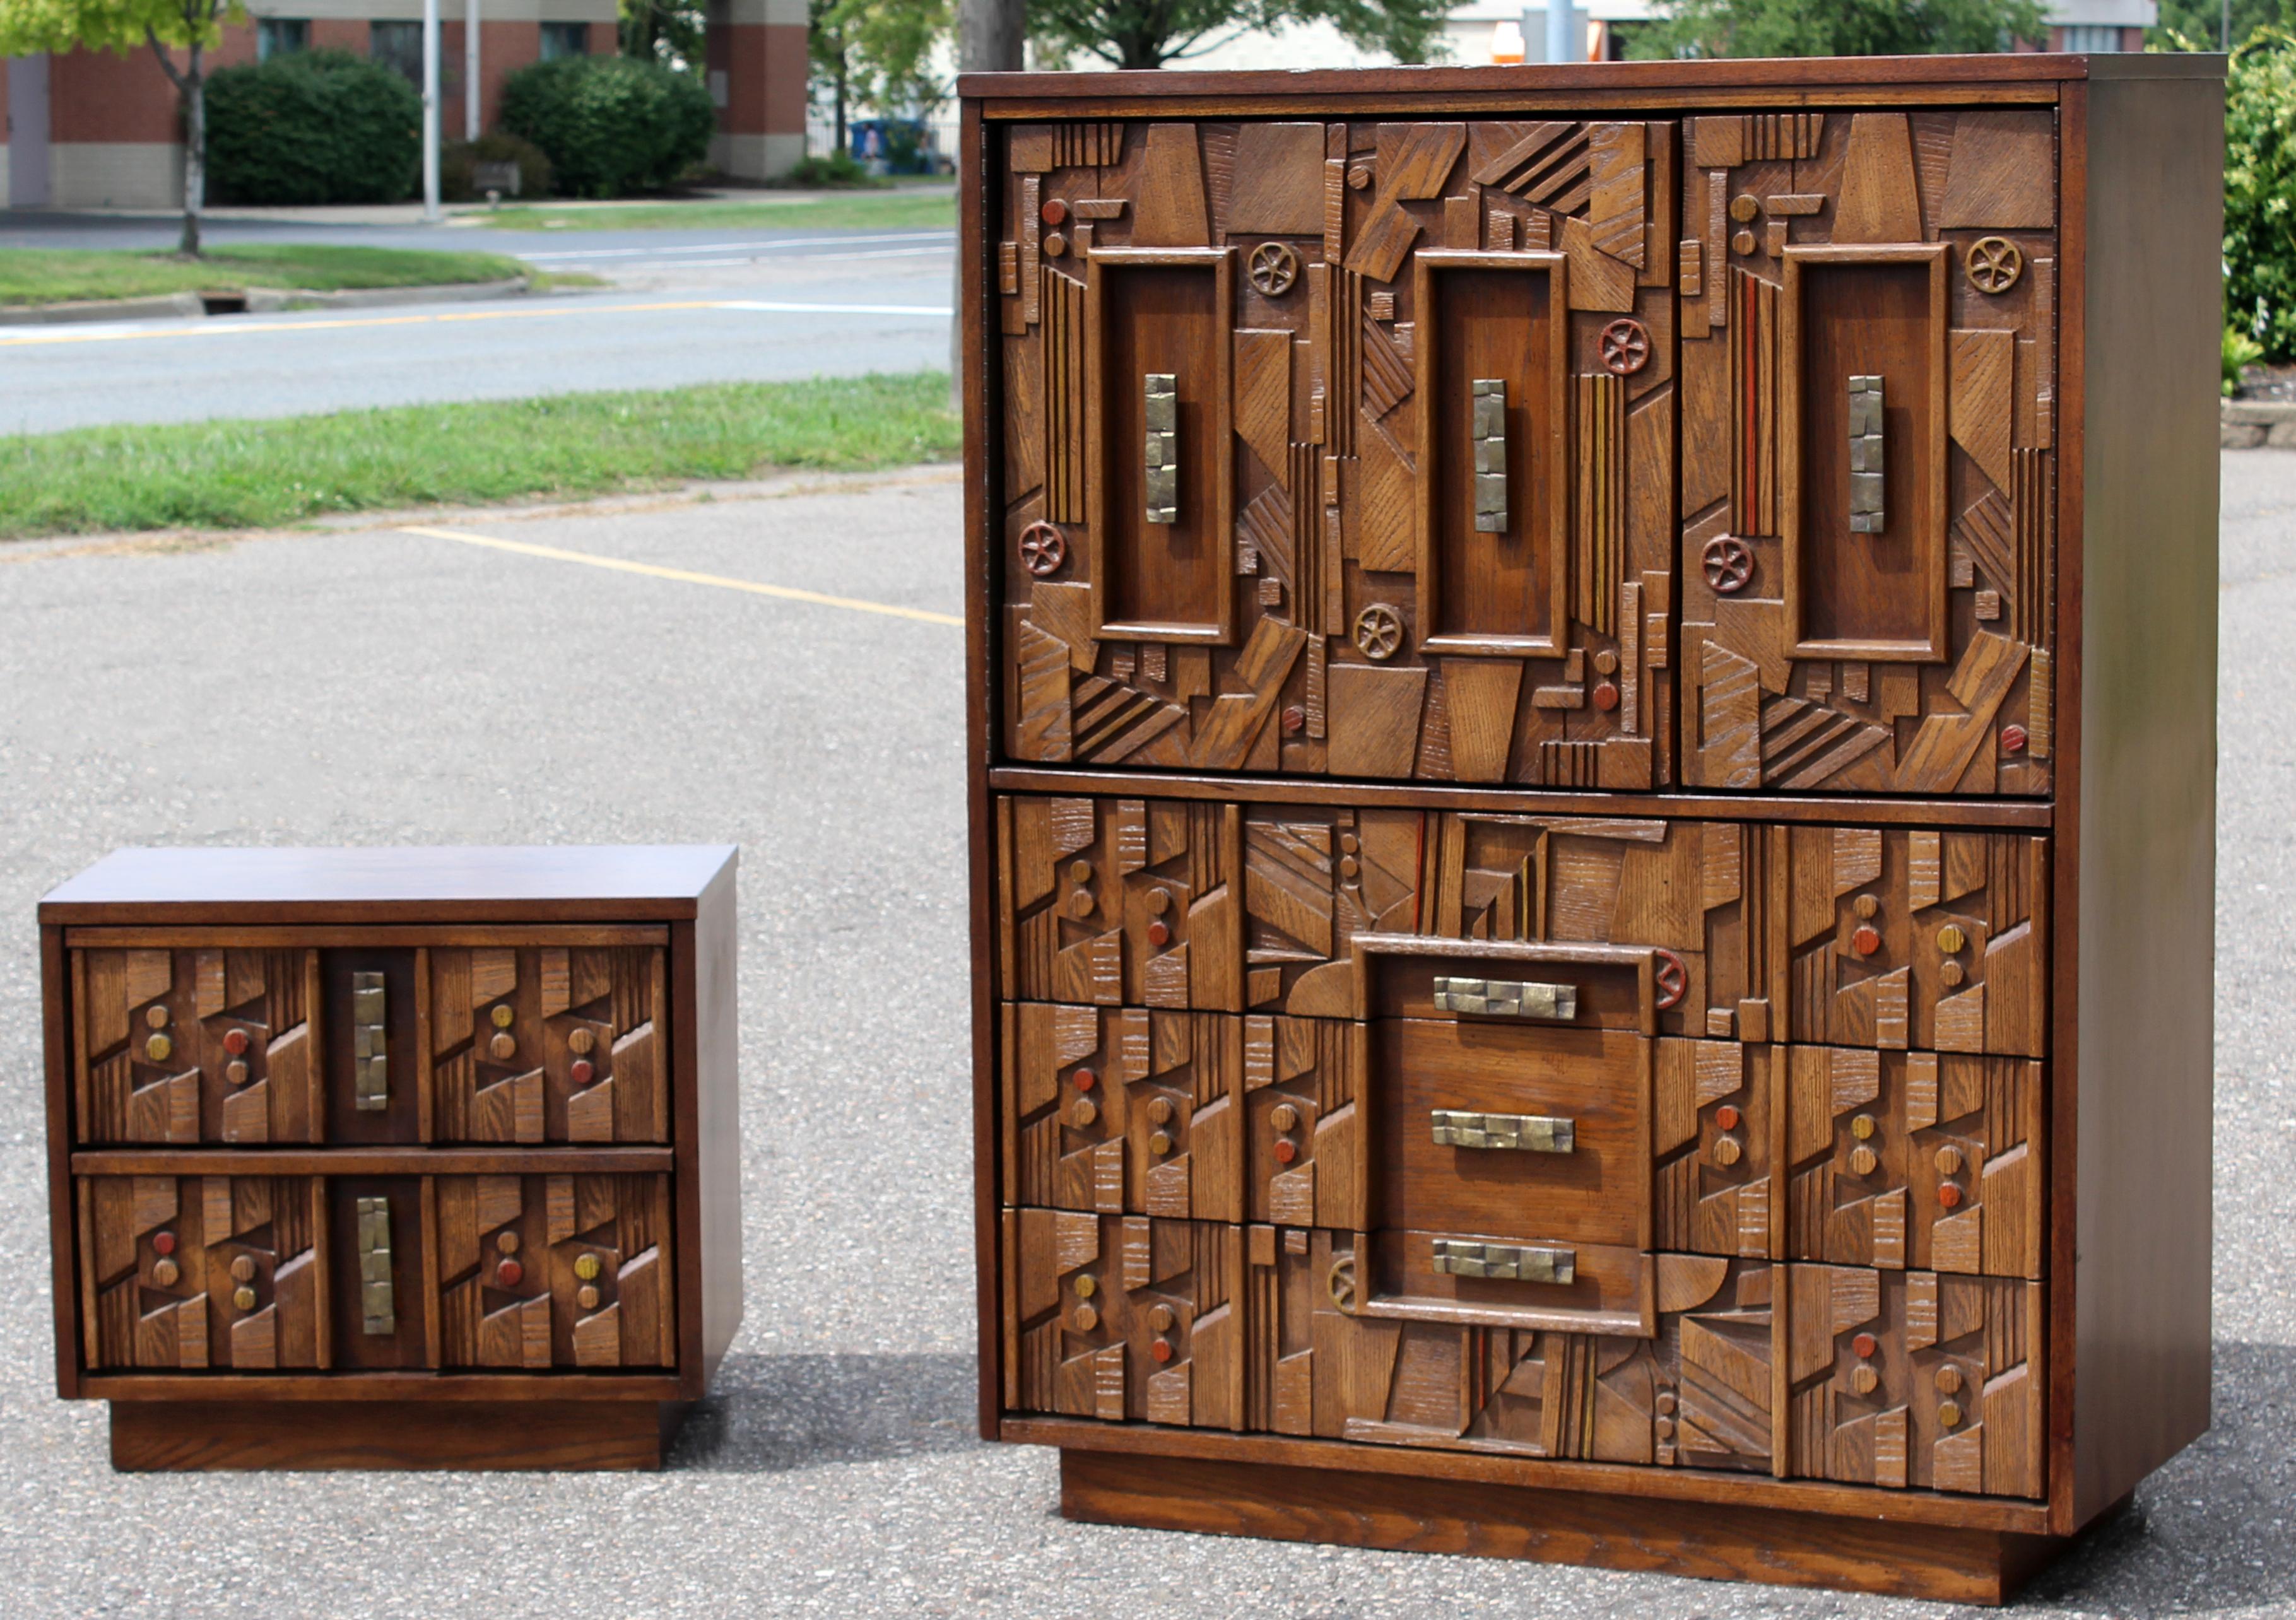 For your consideration is an amazing walnut wood Brutalist highboy dresser and nightstand, by Lane Furniture in the style of Paul Evans with beautiful metal pulls. In very good condition. The dimensions of the dresser are 43